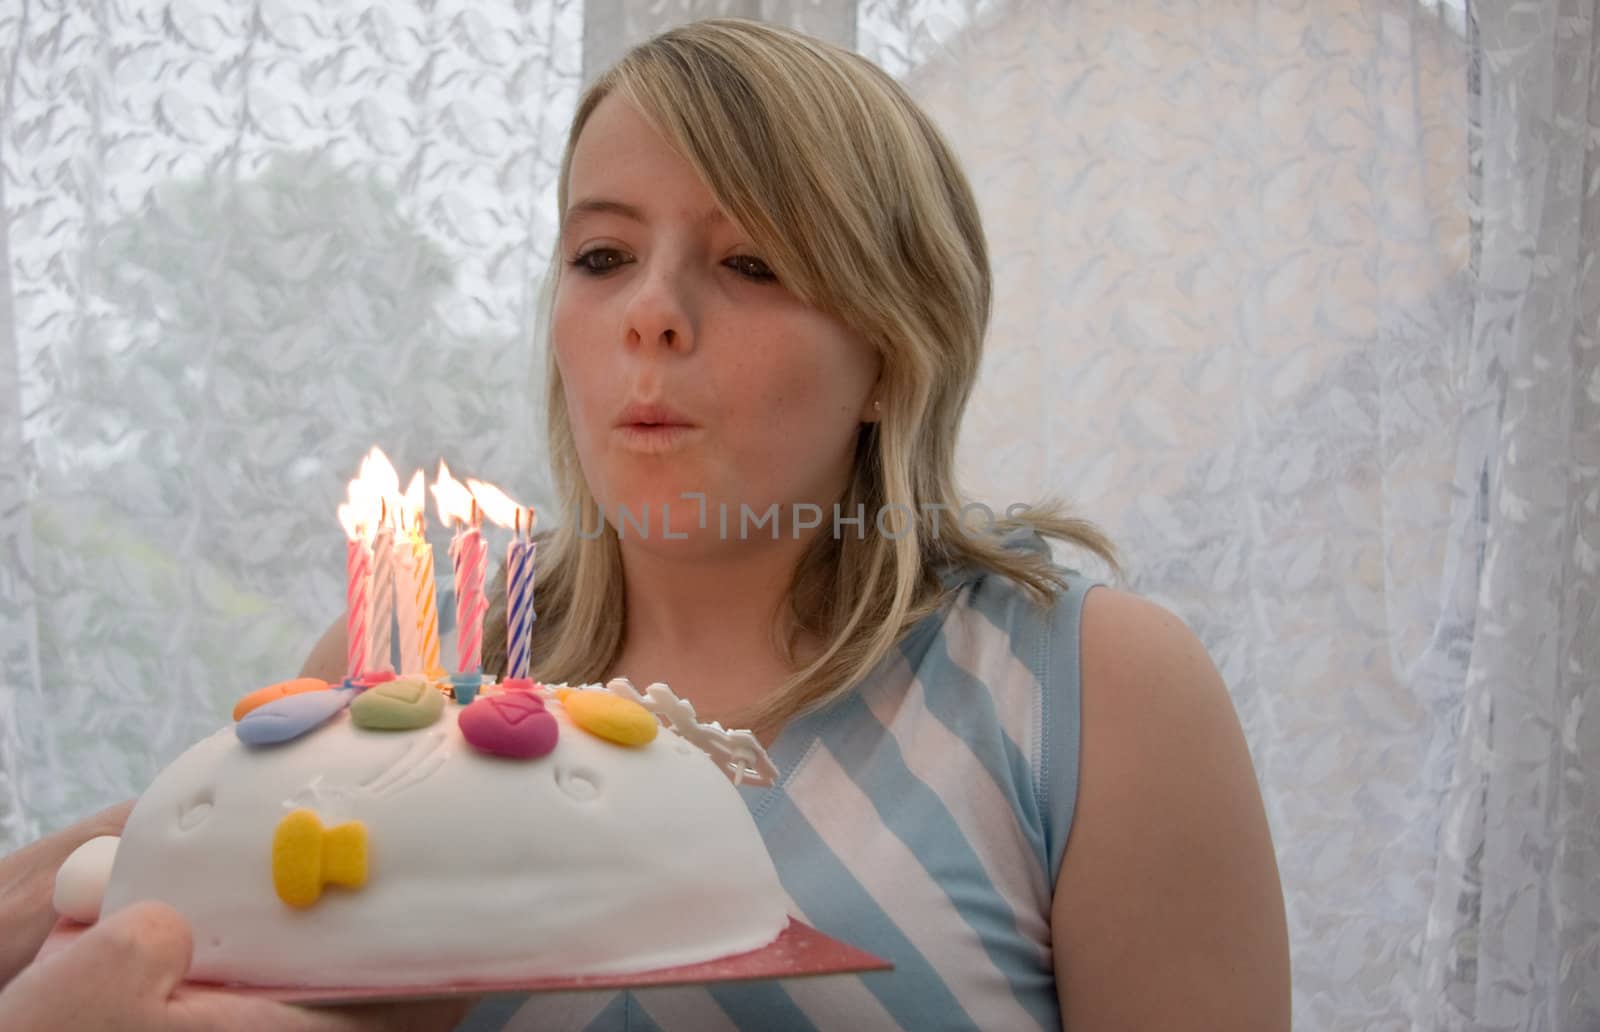 bpretty teenage girl blowing out the candles on her birthday cake.